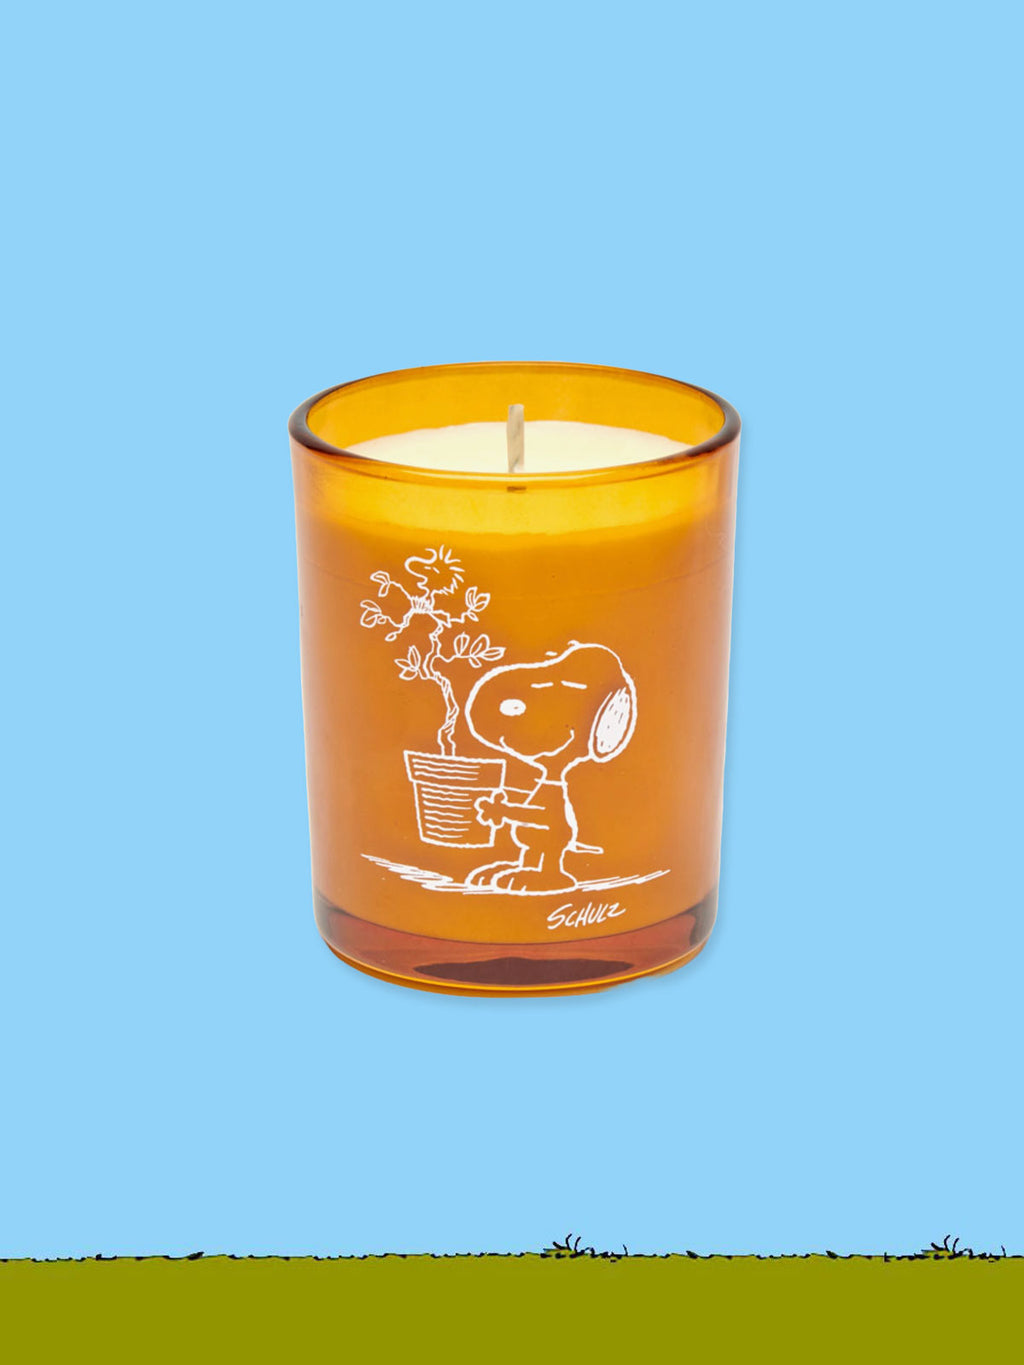 Peanuts Snoopy Blooms Candle - Jasmine and Iris